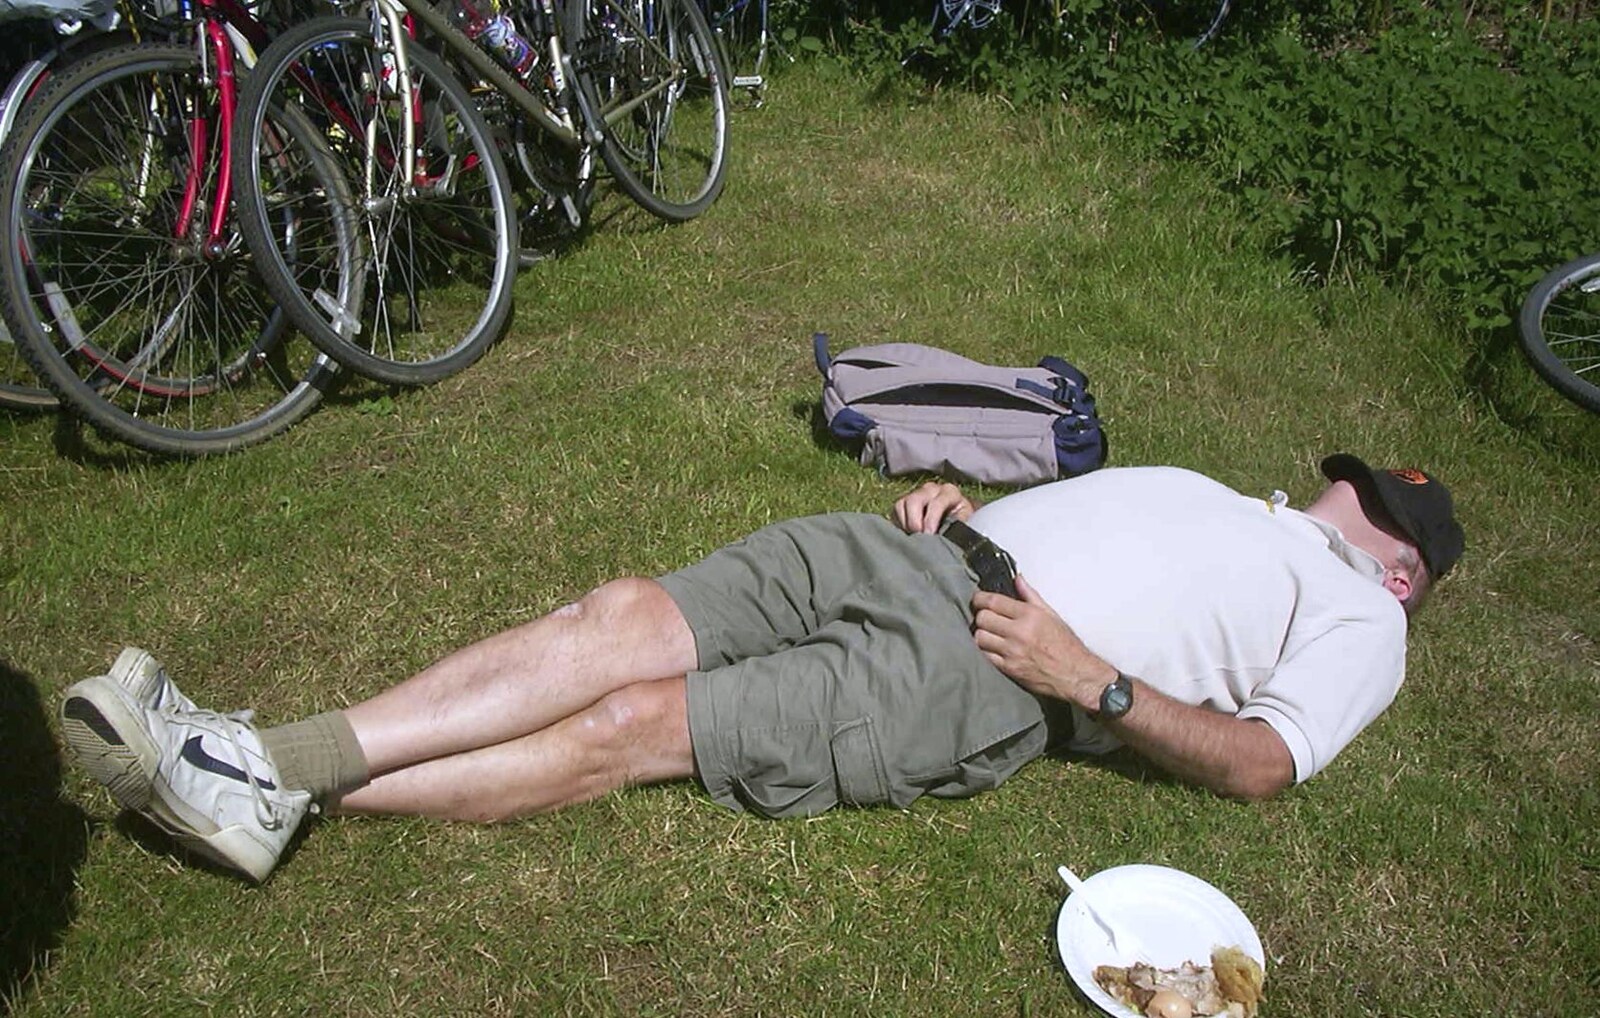 The BSCC Annual Bike Ride, Orford, Suffolk - 12th July 2003: Bindery Dave has a doze